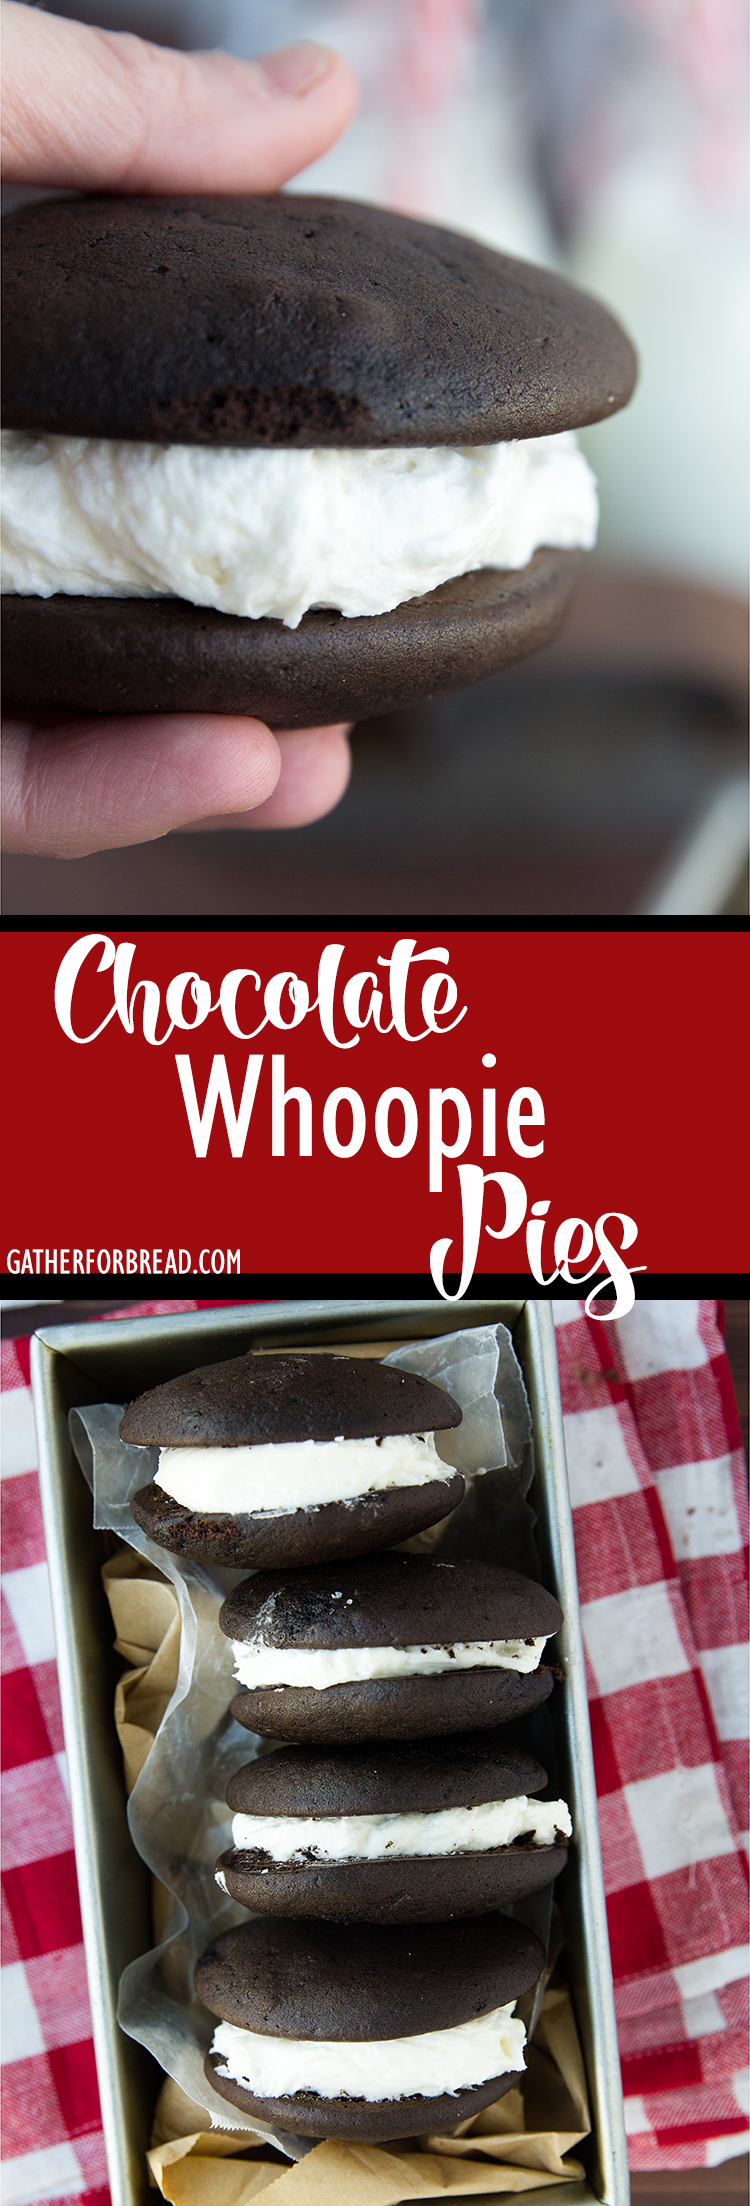 Chocolate Whoopie Pies - Moist chocolate whoopie pies made REAL butter, NO vegetable shortening. These are INCREDIBLE!!! 